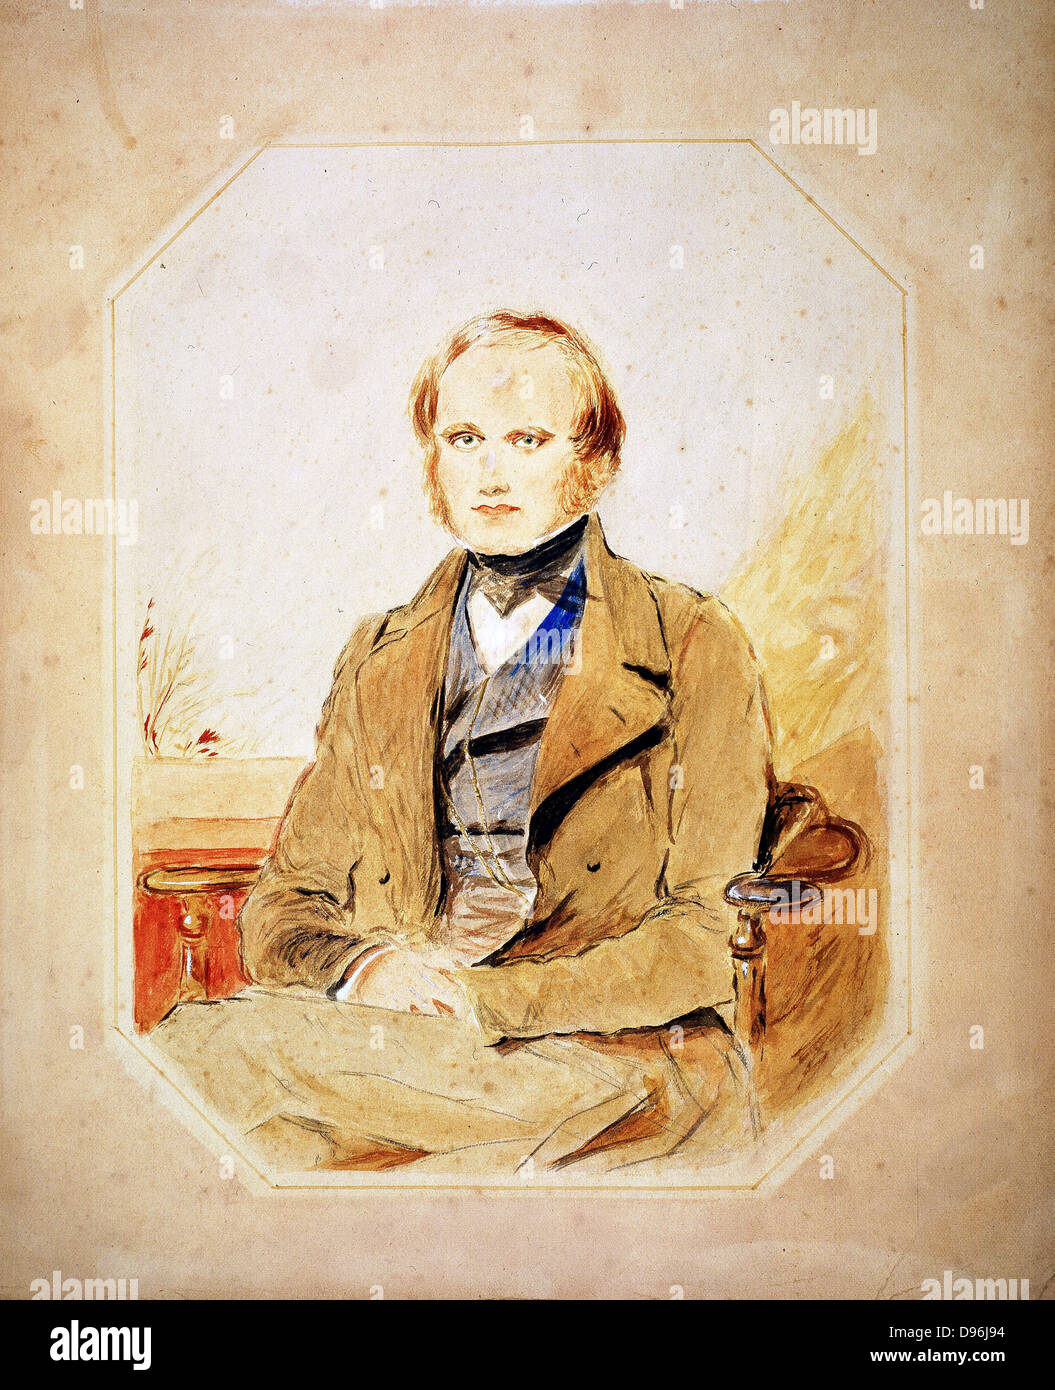 Charles Darwin (1809-82) English naturalist. 'Evolution by Natural Selection'. Watercolour after portrait by George Richmond. Stock Photo